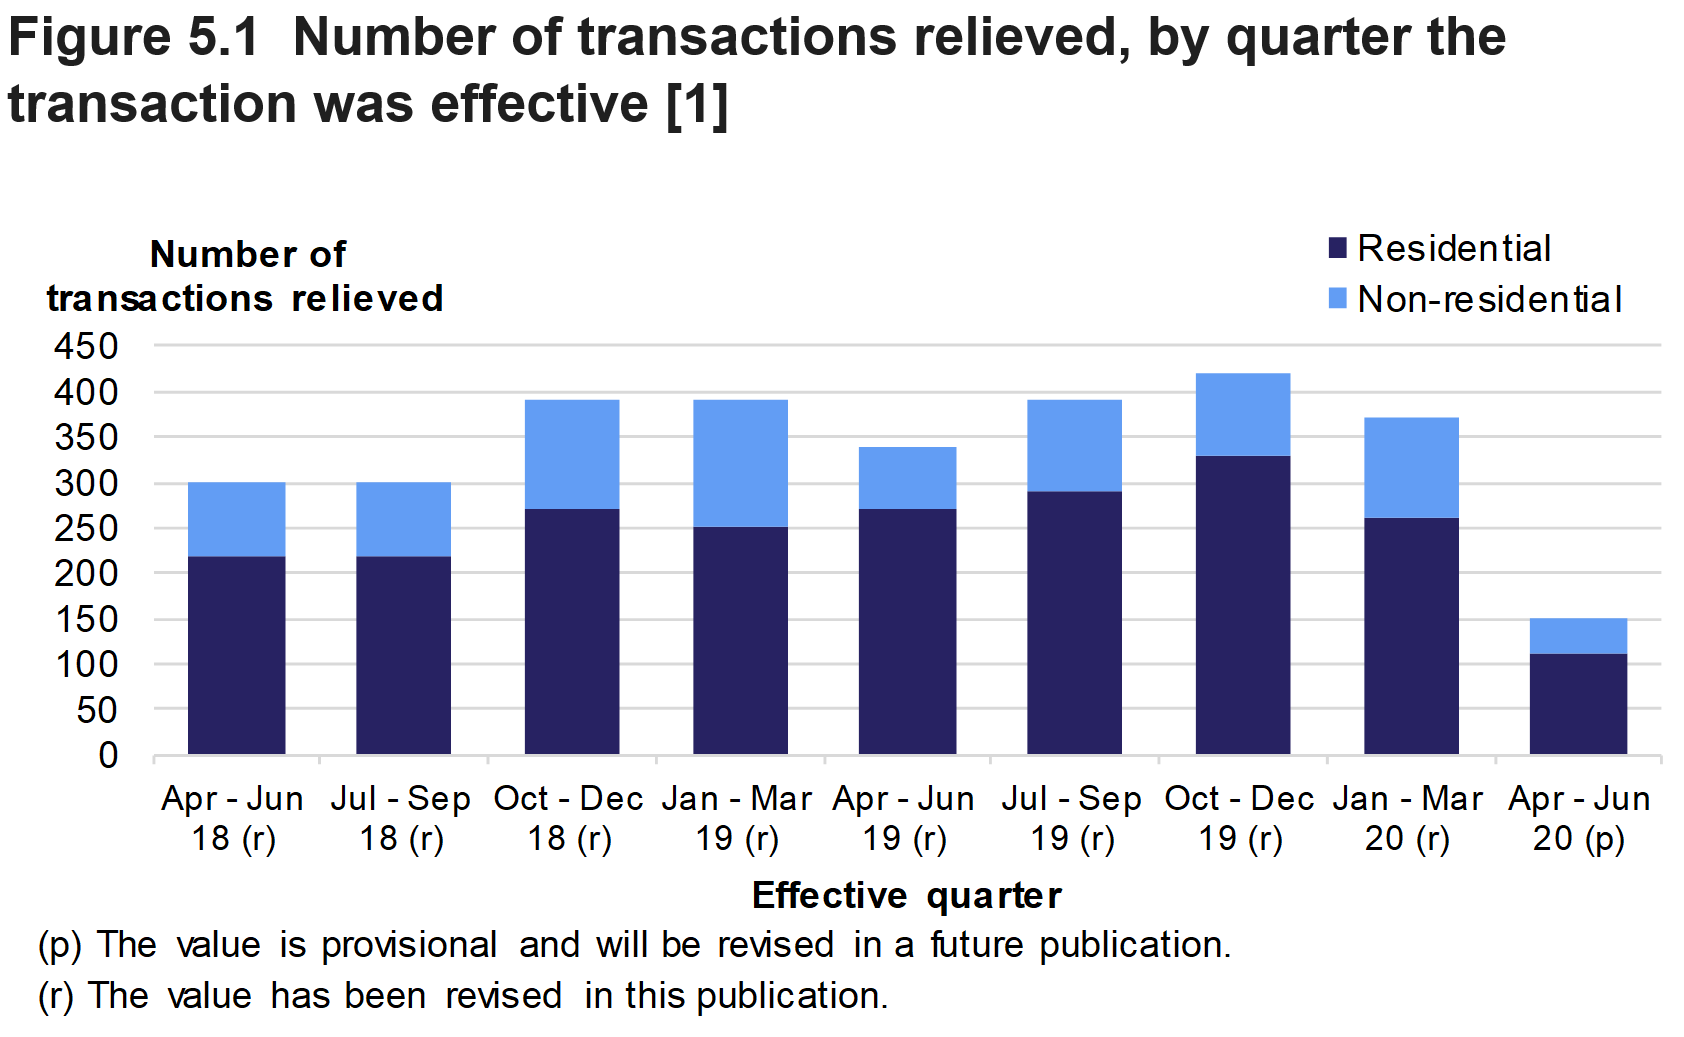 Figure 5.1 shows the number of reliefs applied to residential and non-residential transactions, by type of relief and quarter the transaction was relieved. 